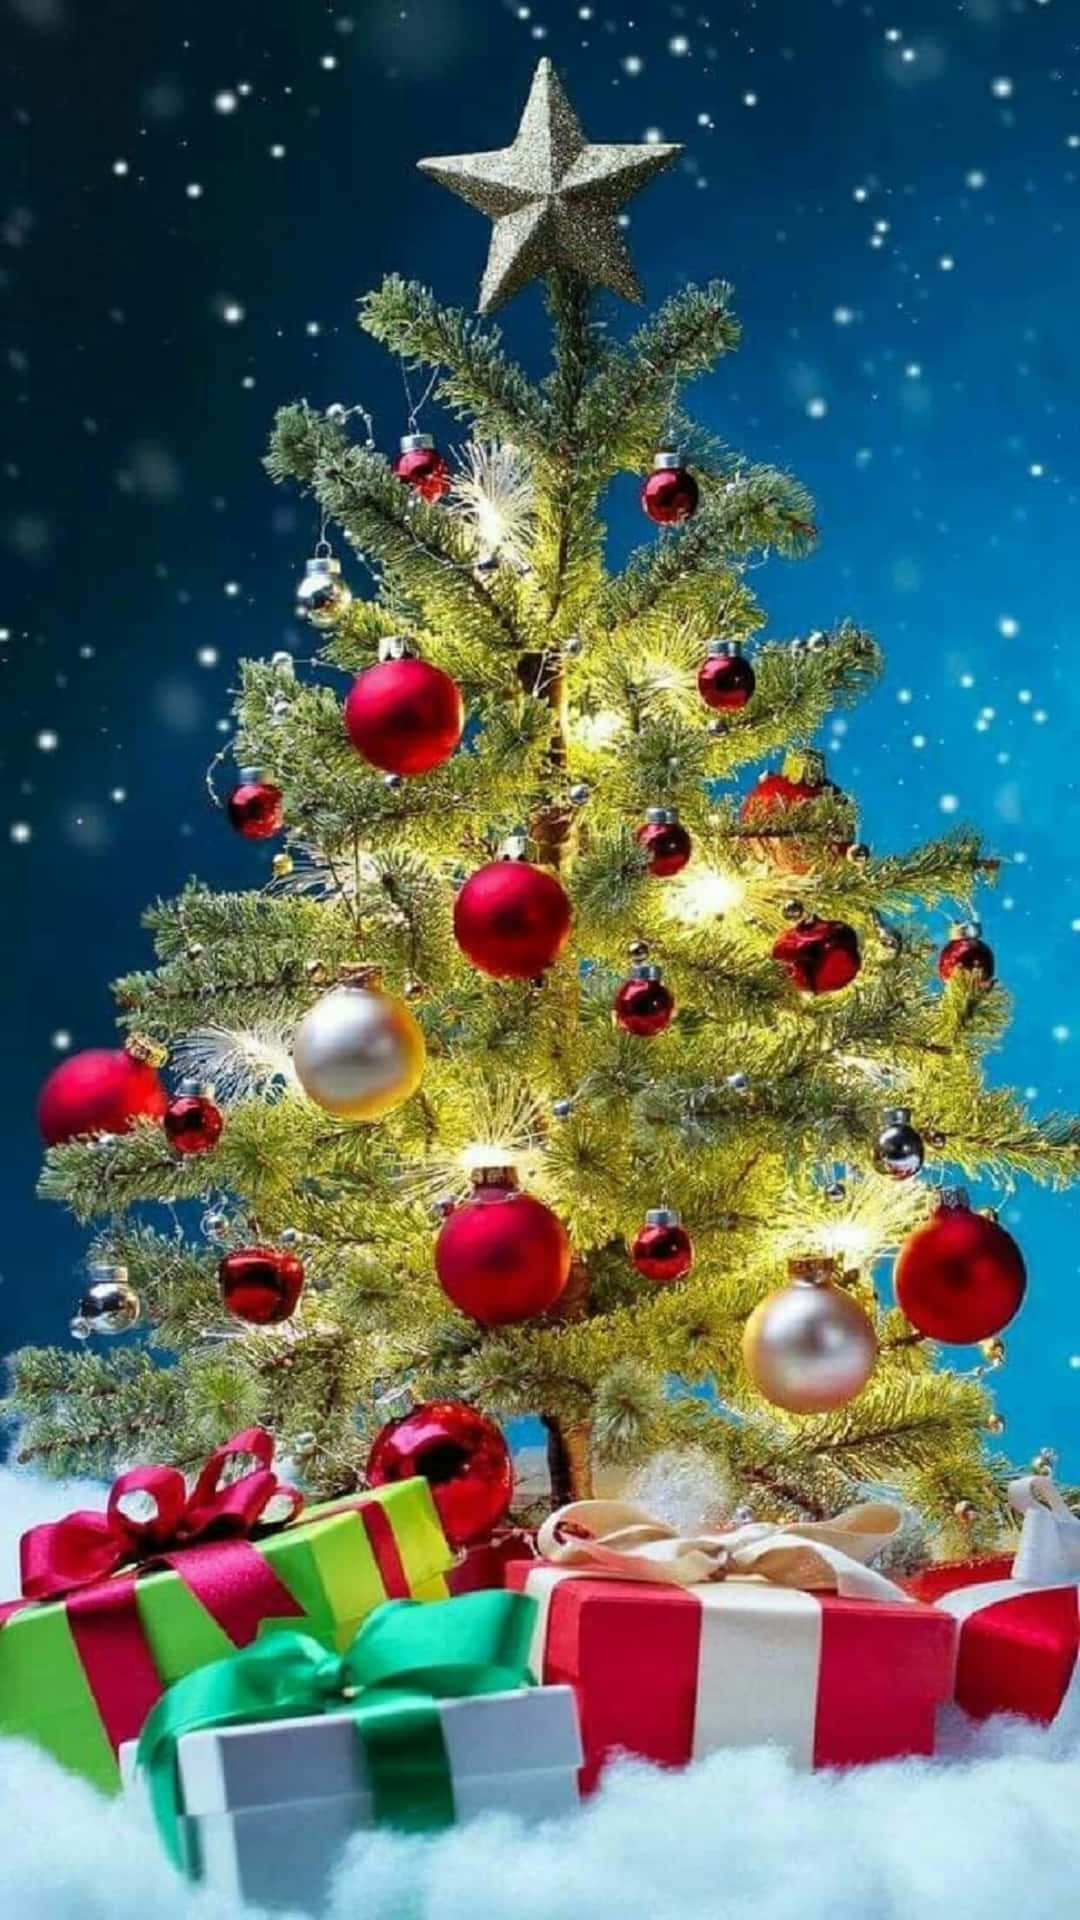 Holiday Iphone 1242 X 2208 Wallpaper